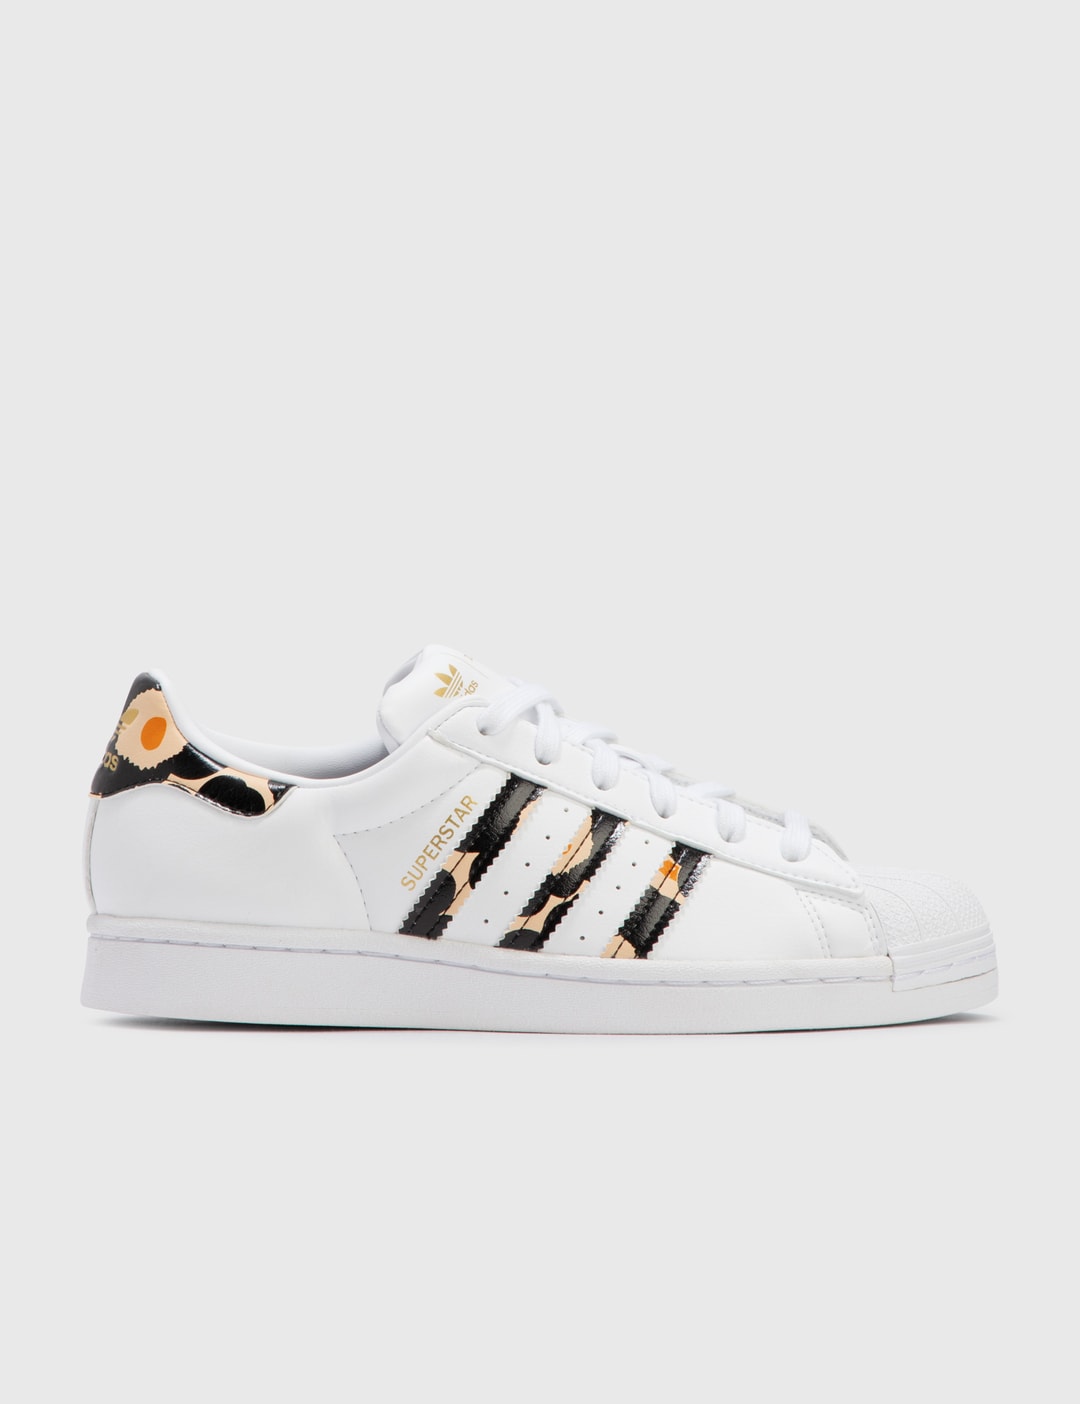 Van Vaardig Massage Adidas Originals - Superstar W | HBX - Globally Curated Fashion and  Lifestyle by Hypebeast